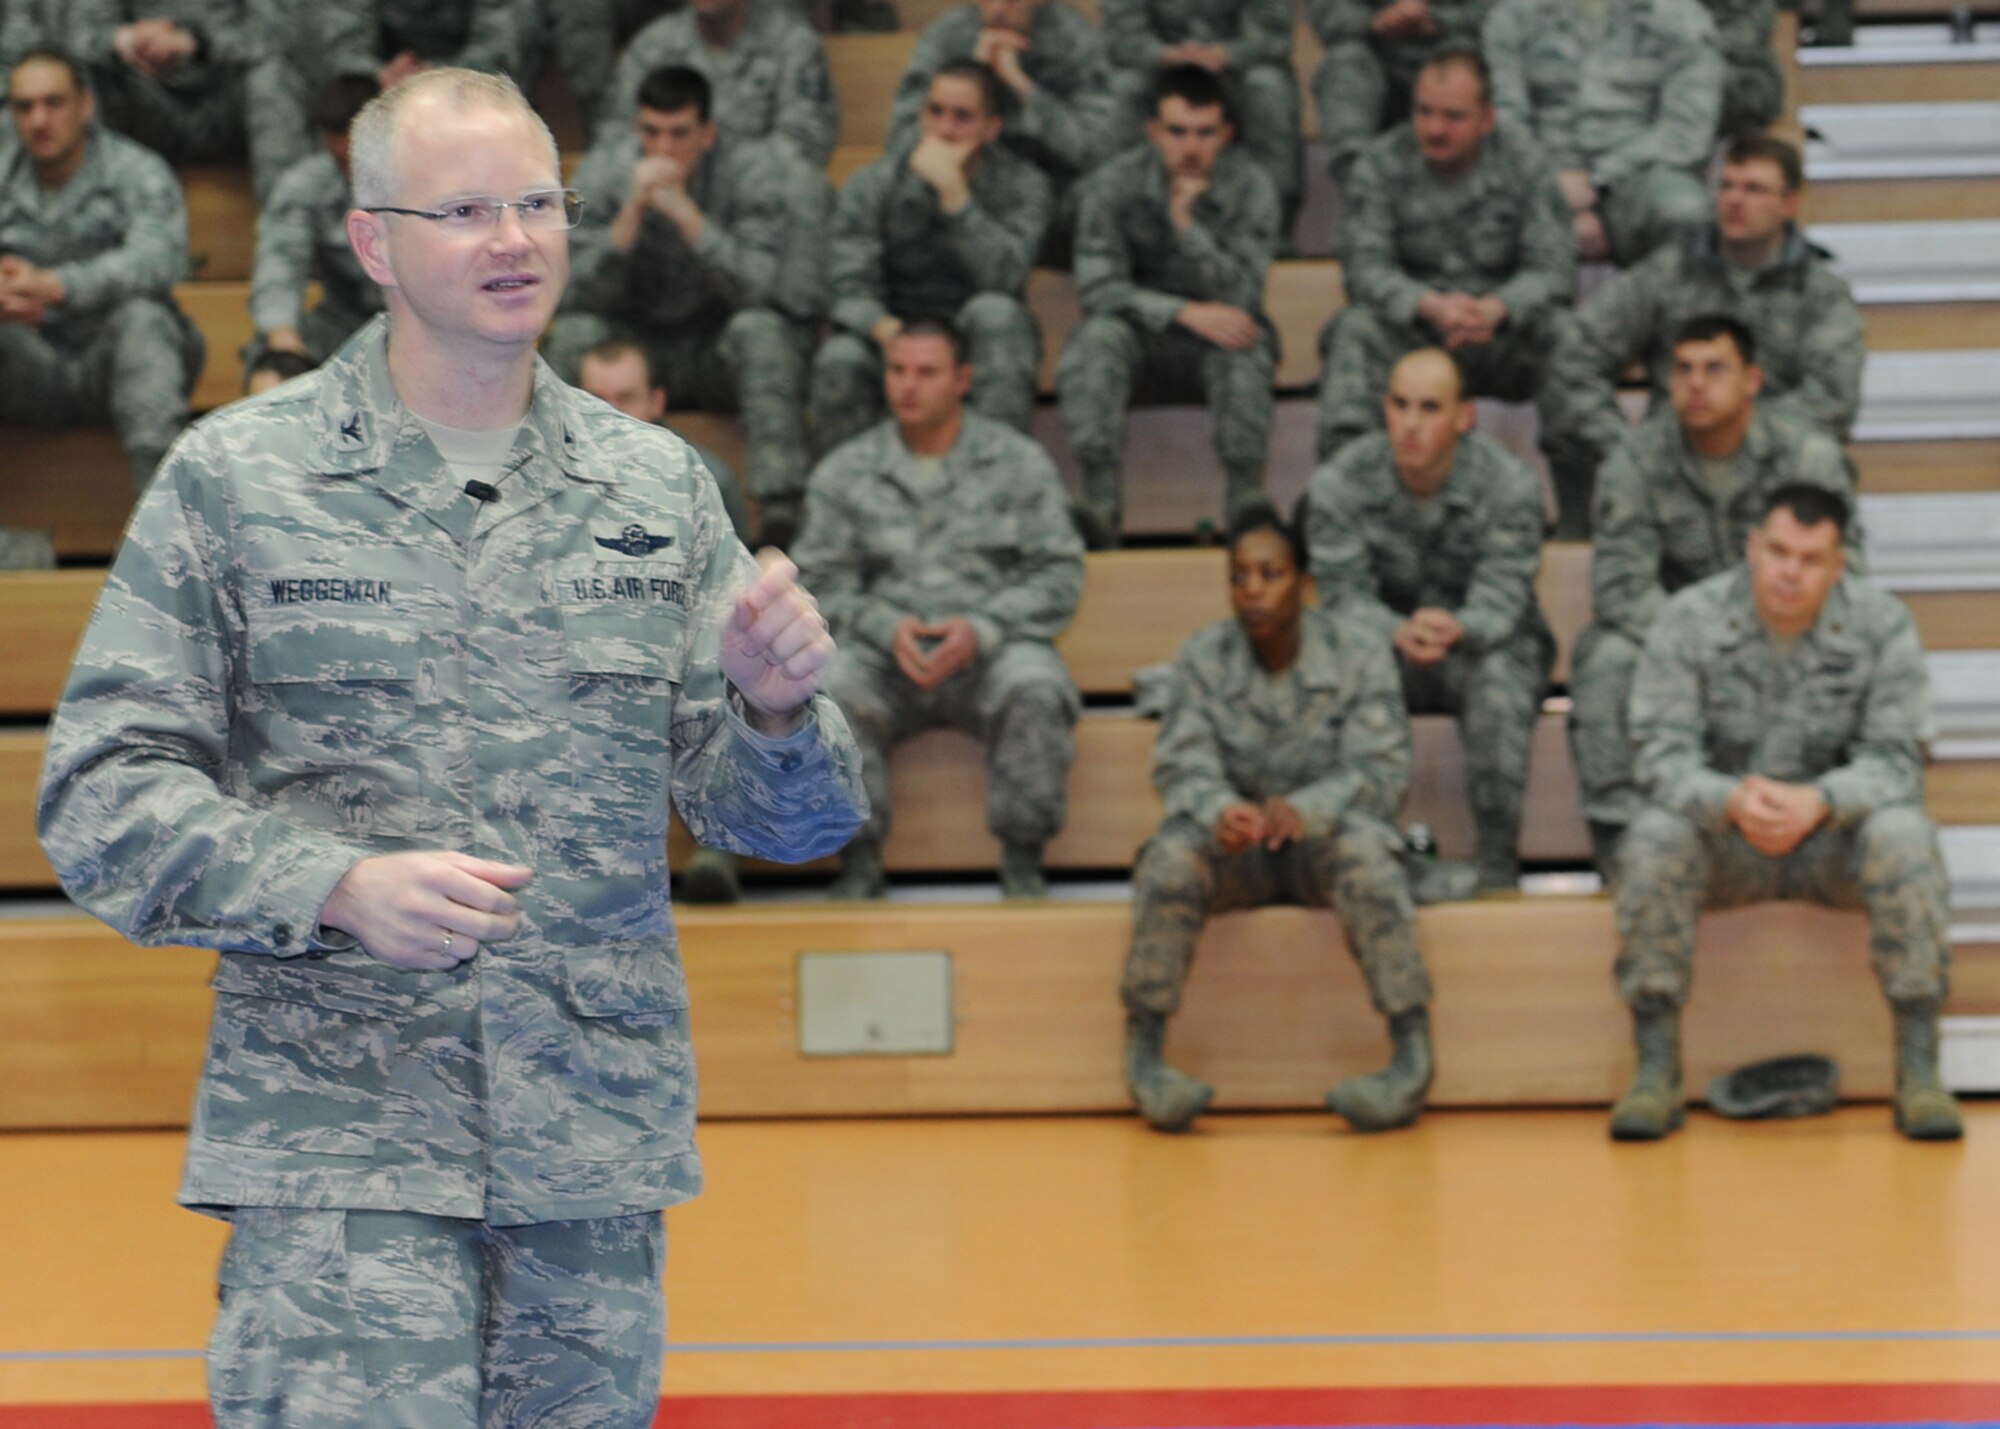 SPANGDAHLEM AIR BASE, Germany – Col. Chris Weggeman, 52nd Fighter Wing commander, briefs Airmen during a commander’s call at the Skelton Memorial Fitness Center here March 21. Weggeman spoke about current and upcoming changes to the Air Force, which are designed to modernize its air, space and cyber inventories. (U.S. Air Force photo by Senior Airman Christopher Toon/Released)